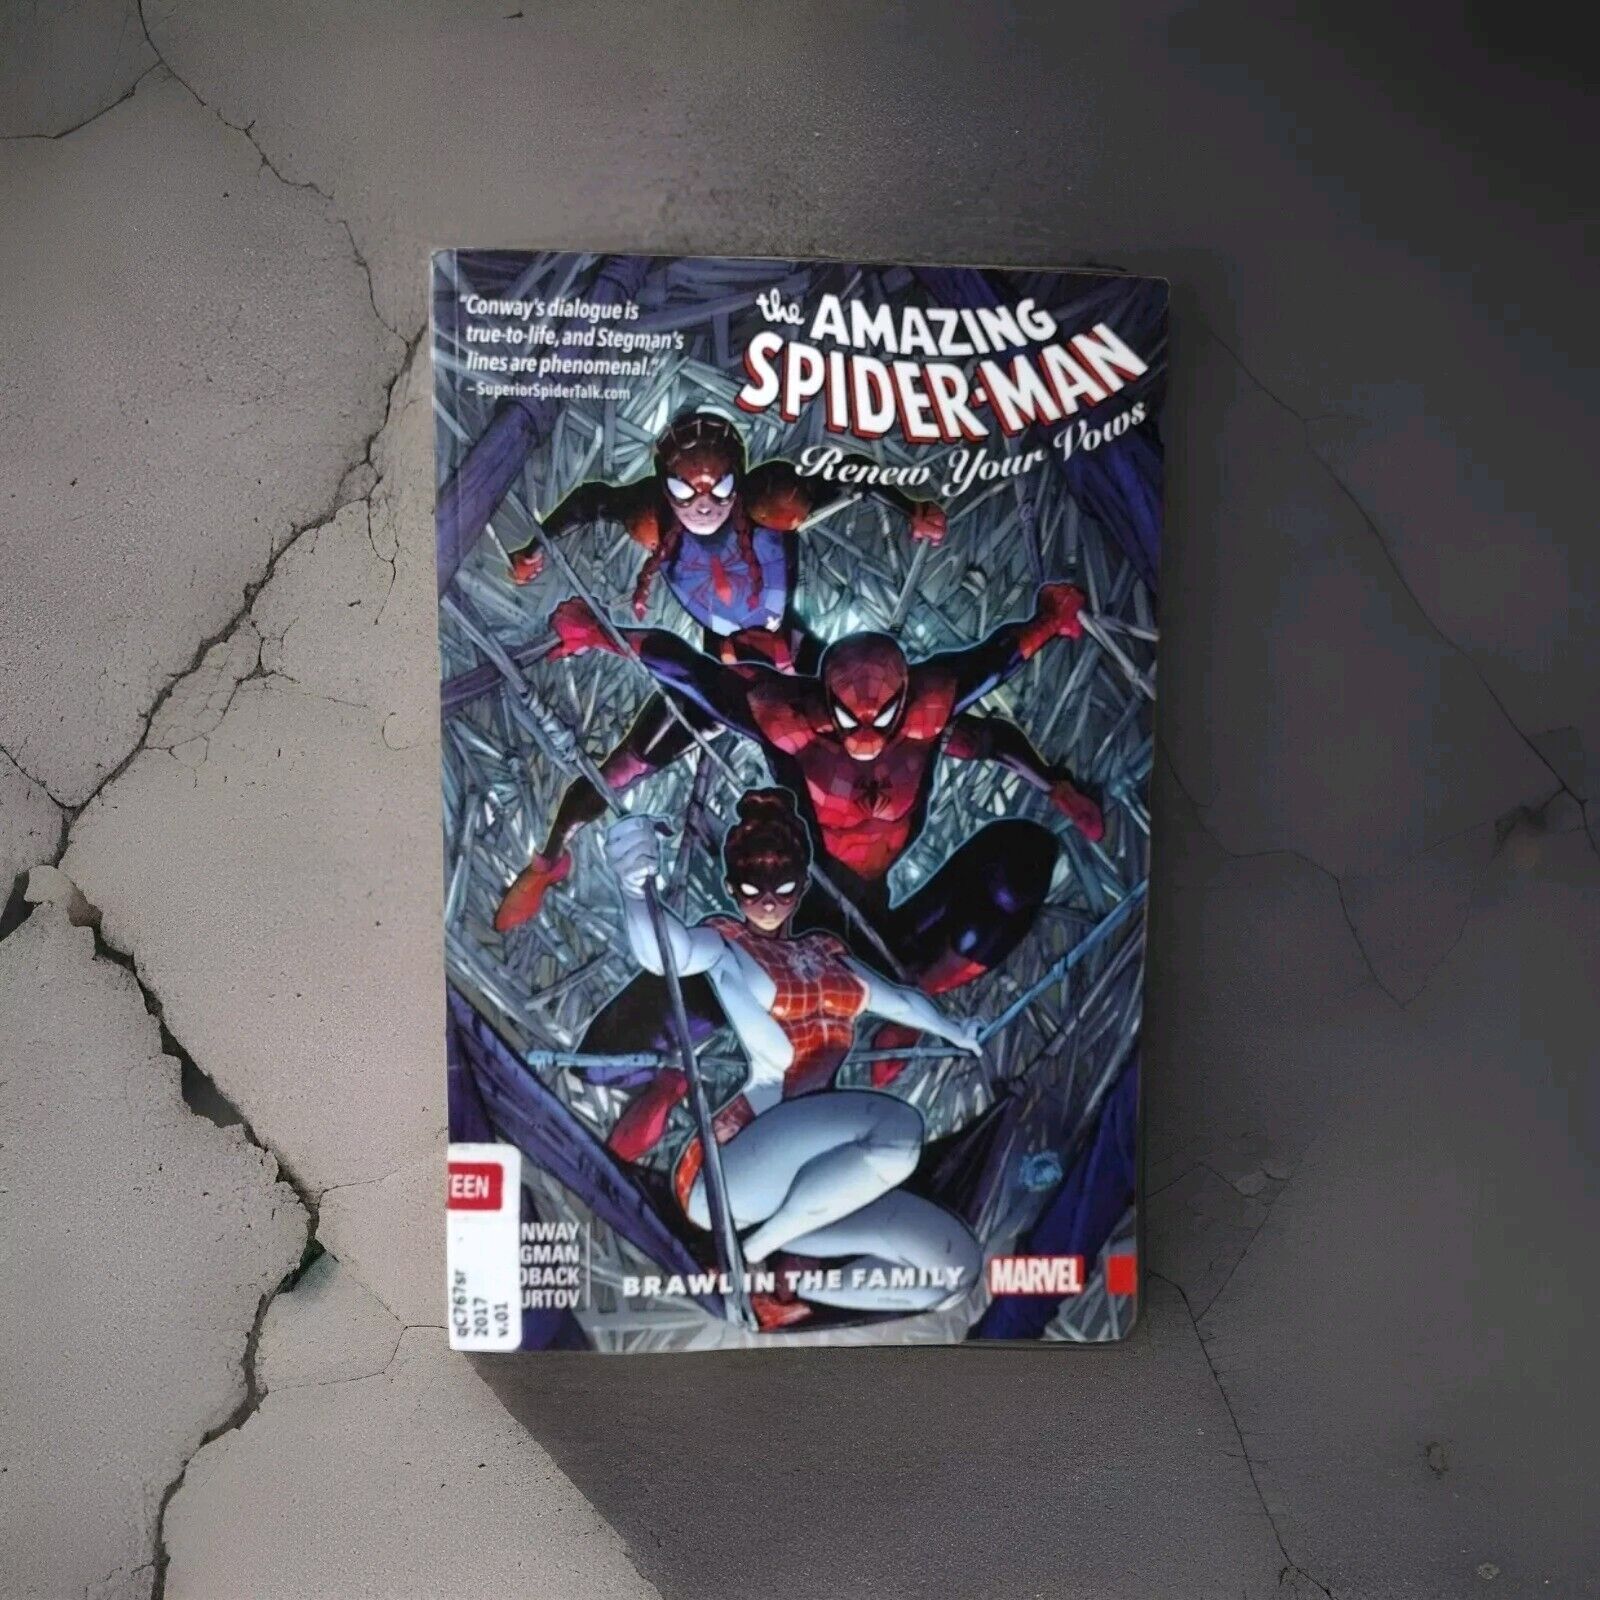 The Amazing Spider-Man Renew Your Vows Volume 1: Brawl In The Family (EX LIBRIS)